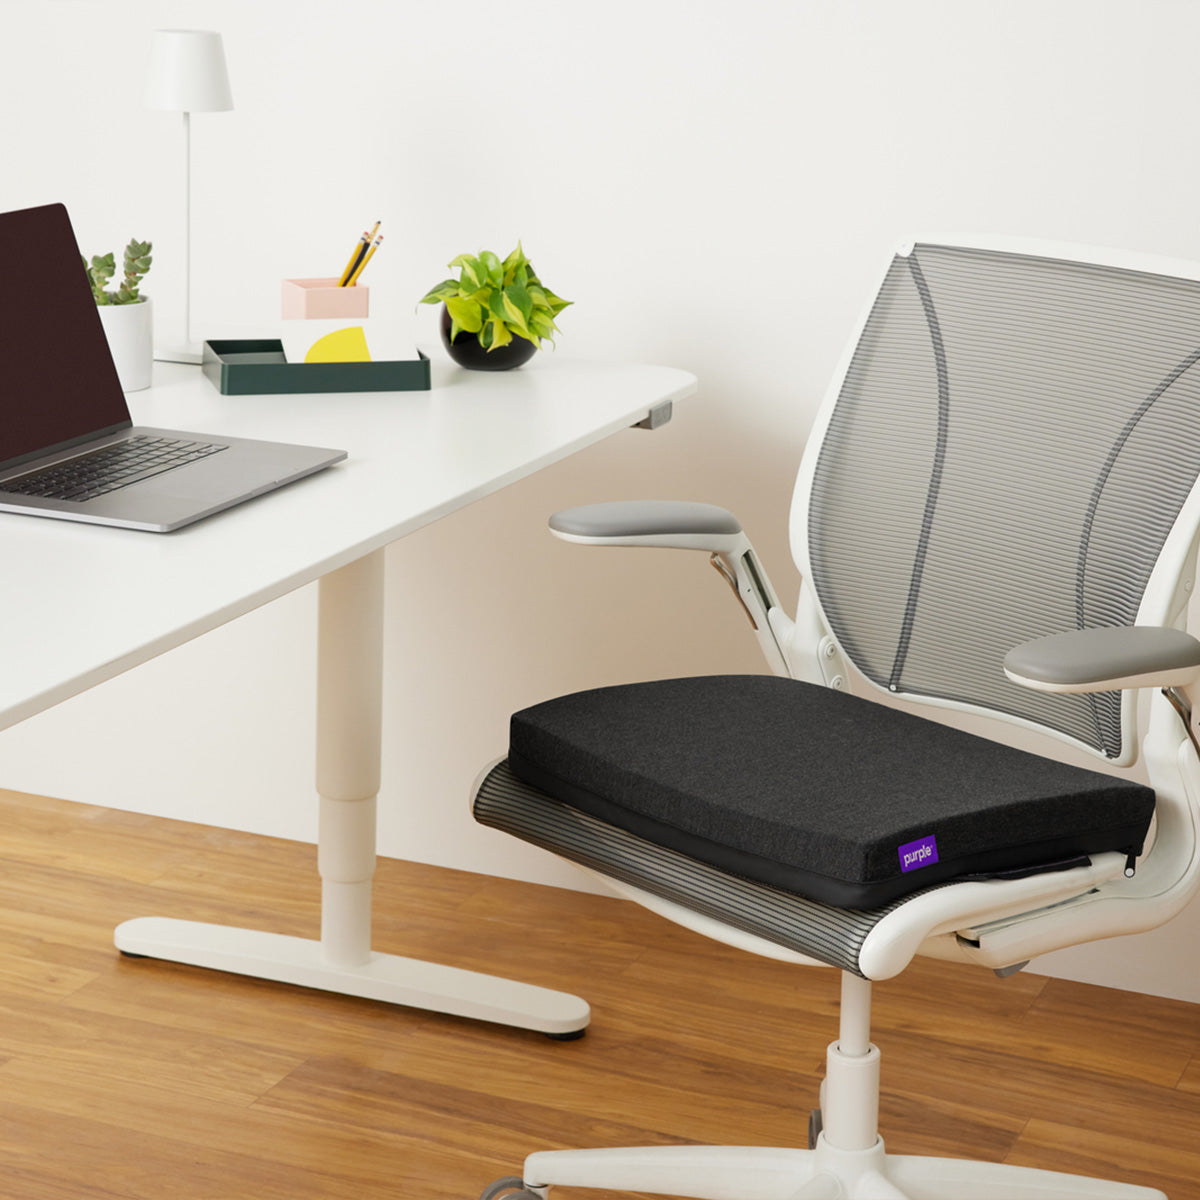 Purple Double Seat Cushion On An Office Chair Near A Desk With Laptop And Plants